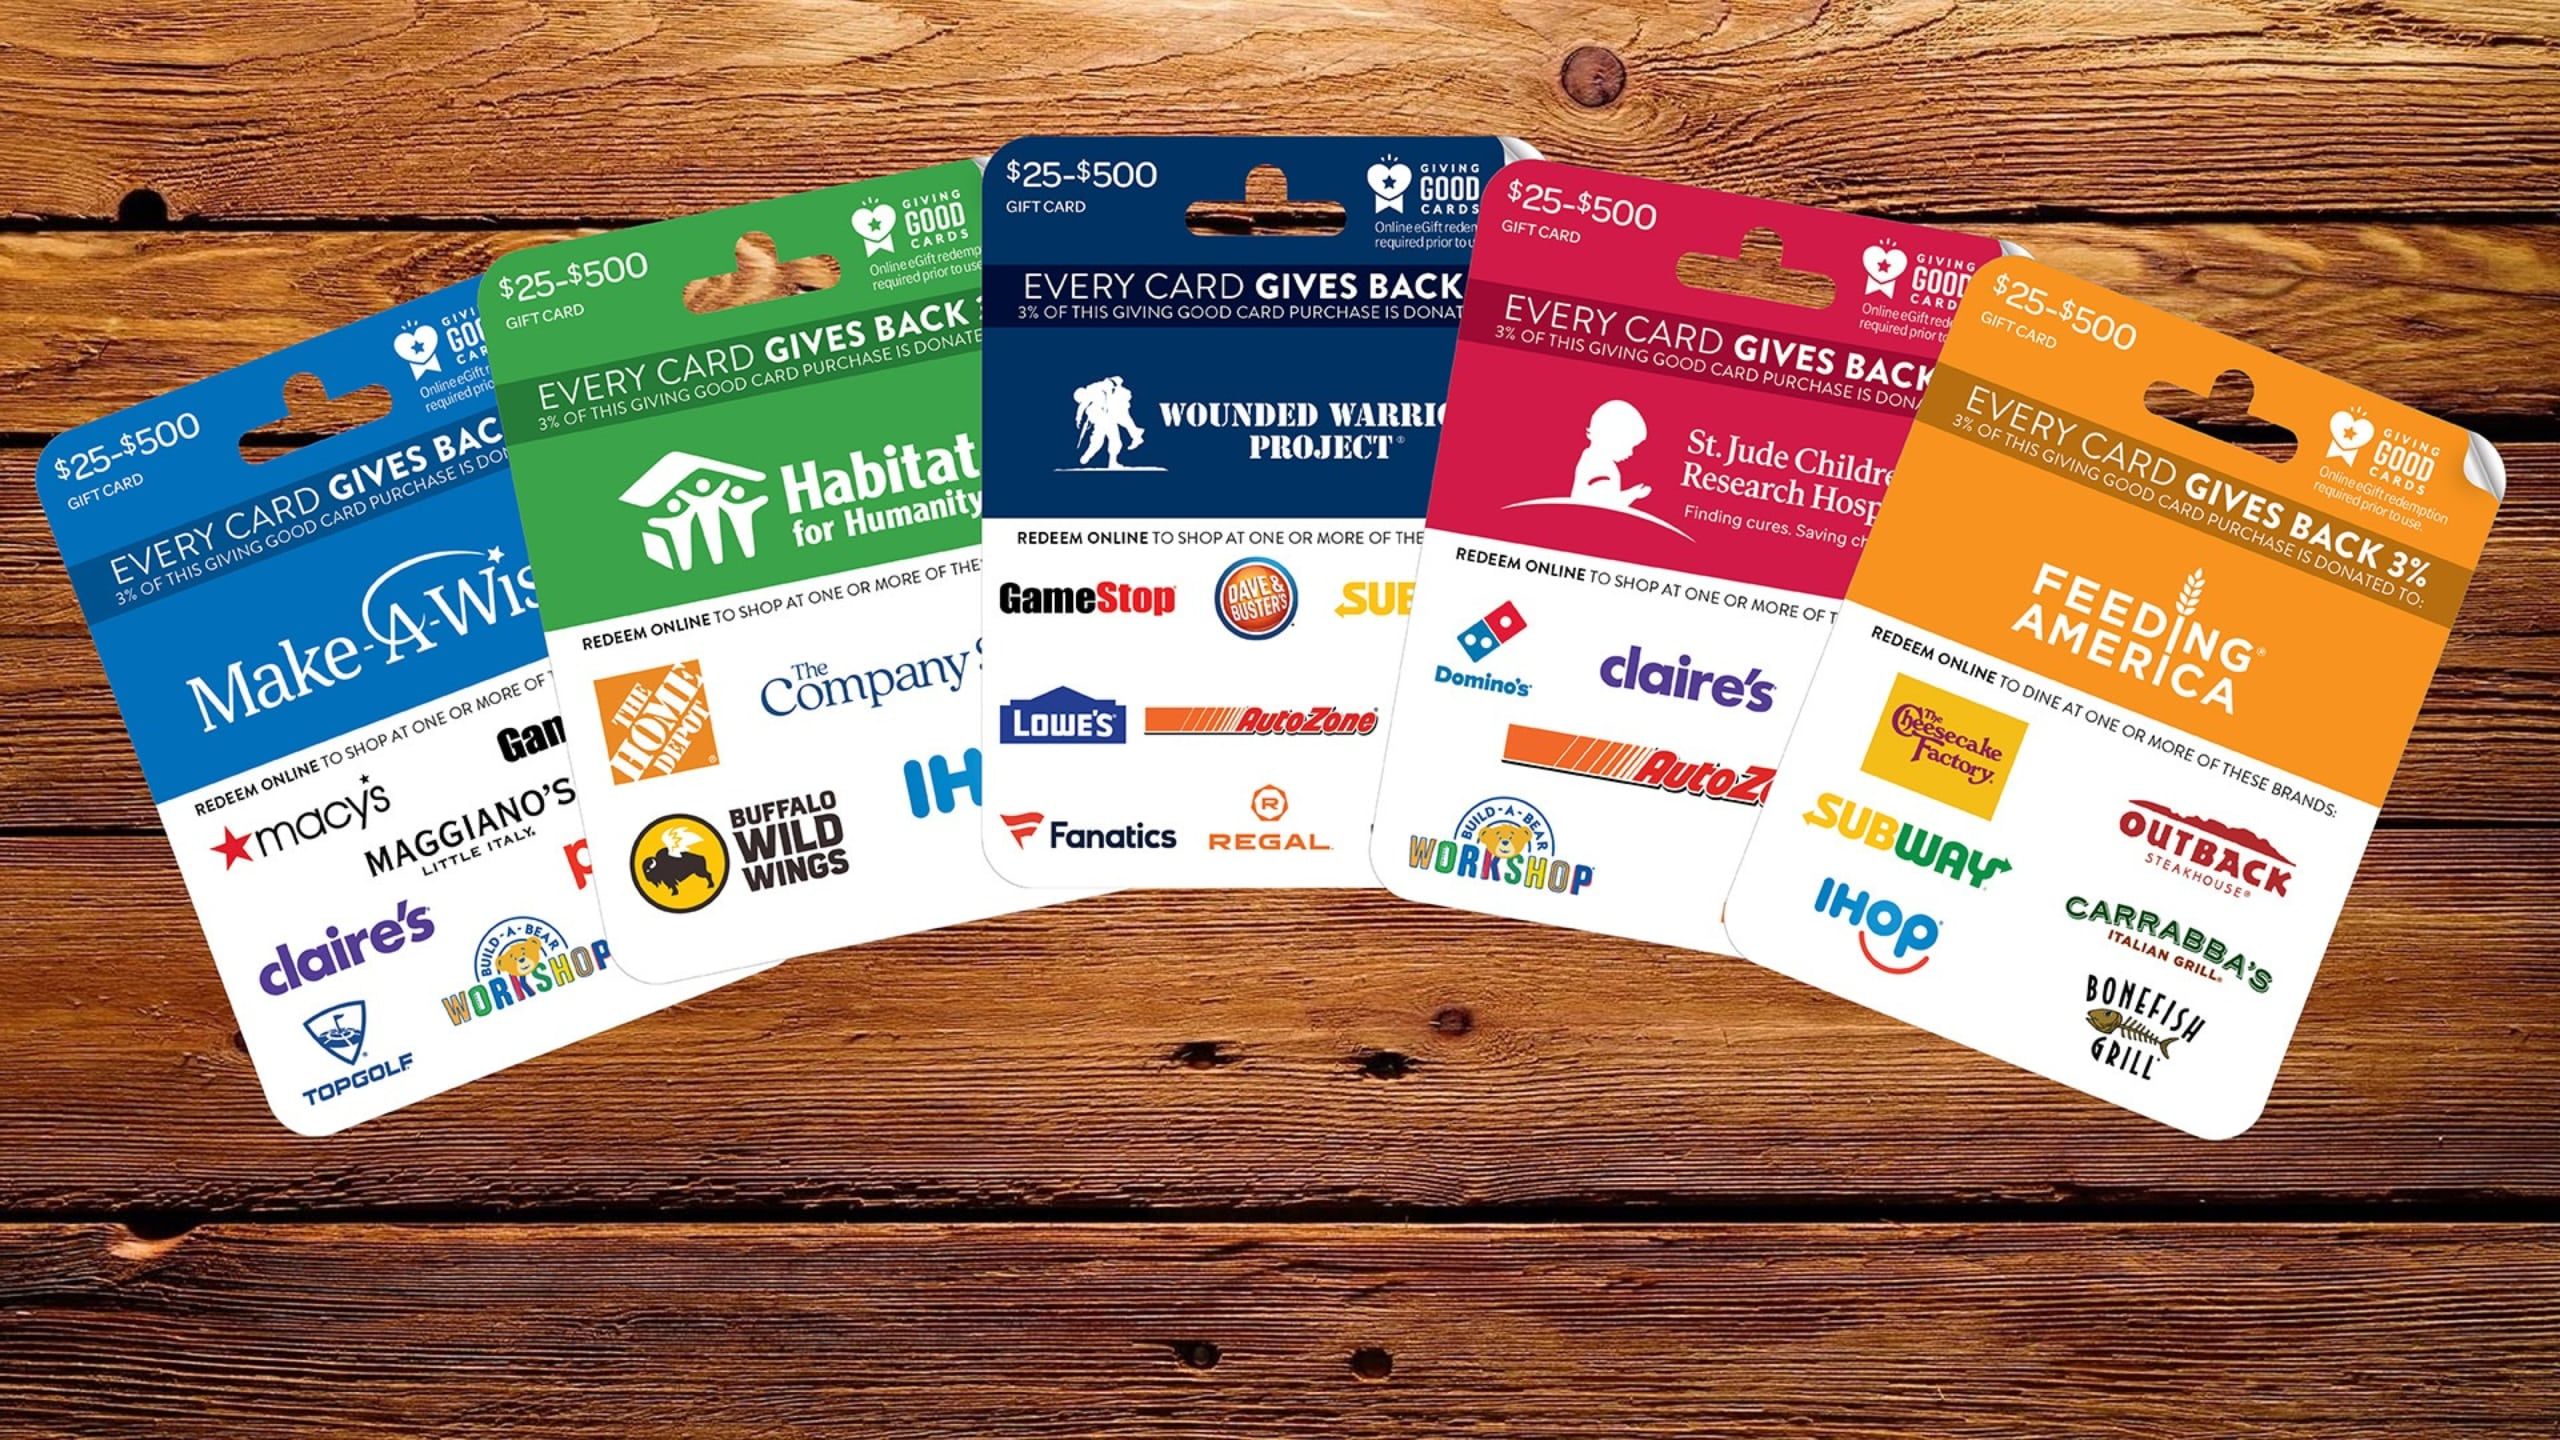 corporate gift cards from different brands, begs the question, are employee gift cards taxable?